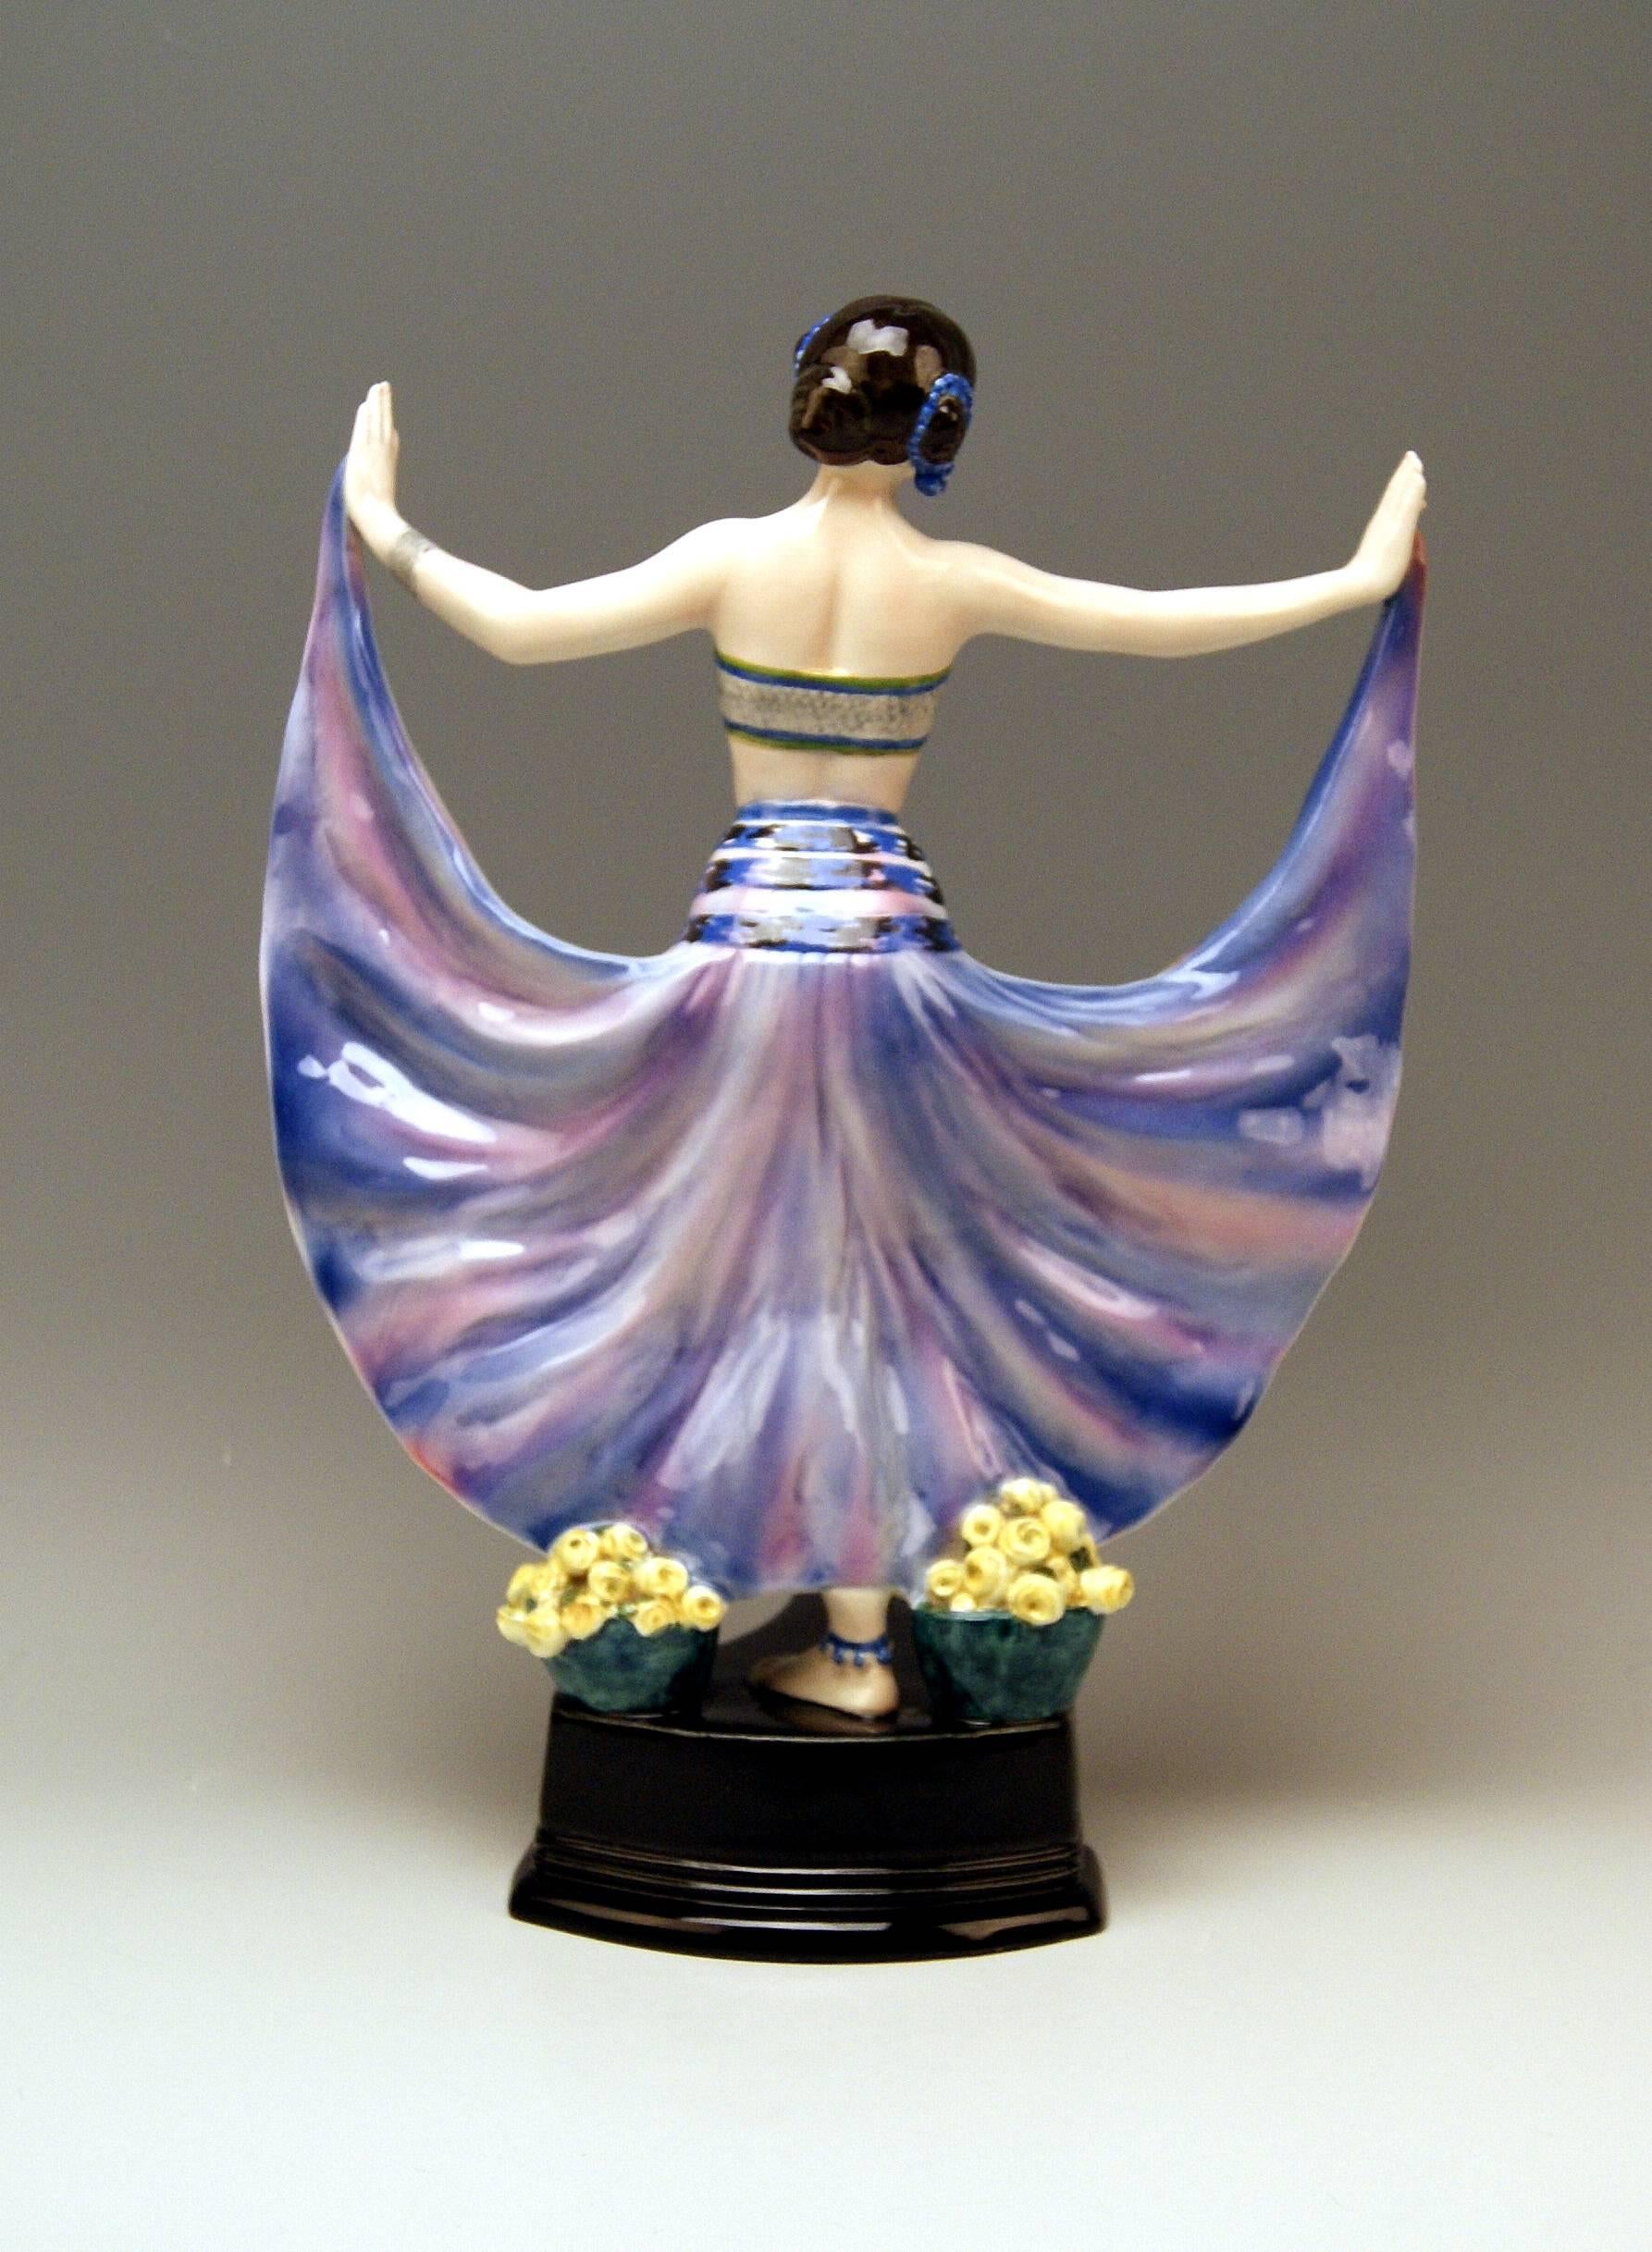 Goldscheider Vienna stunning figurine: Lady dancer called Ruth

Designer:
Rosé (Pseudonym / Stanislaus Czapek ?)
A very important designer having been active for Goldscheider manufactory in period of 1912 - 1930 / this pseudonym is visible on